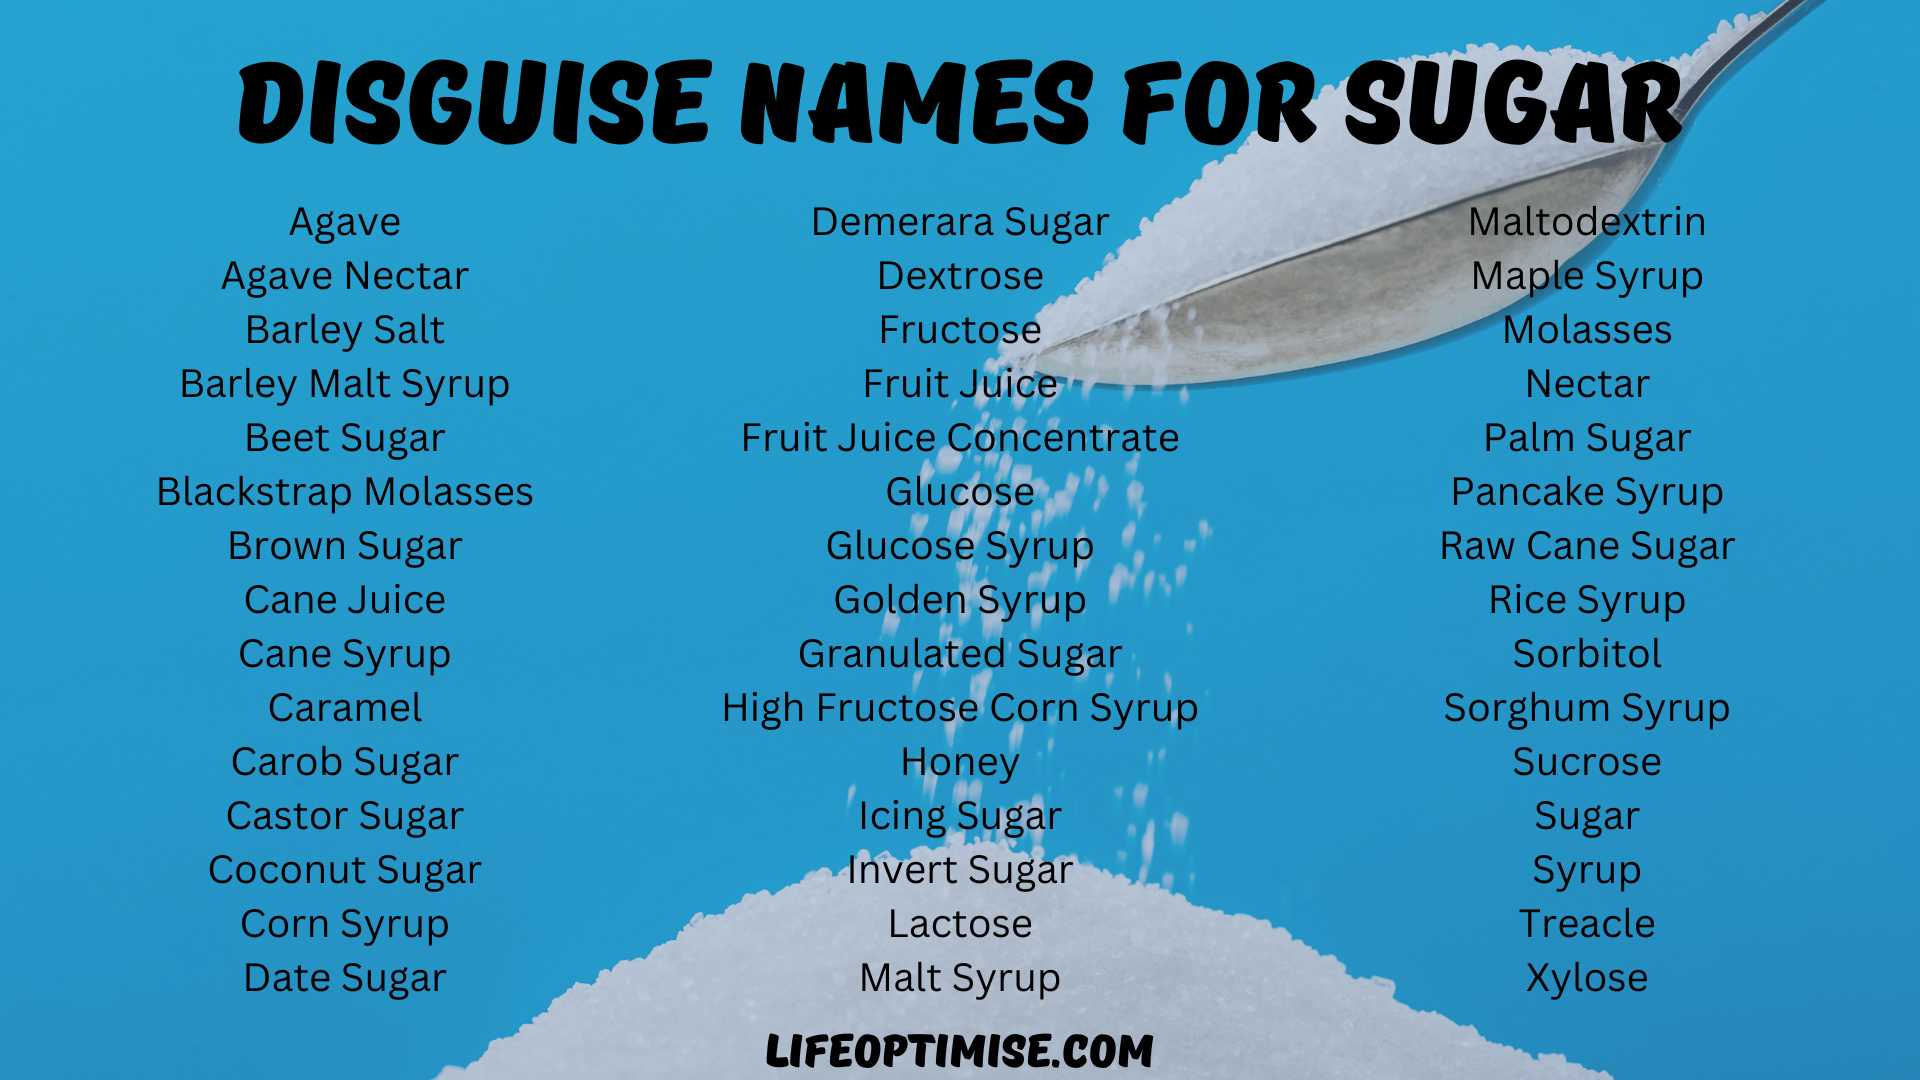 Other names for sugar